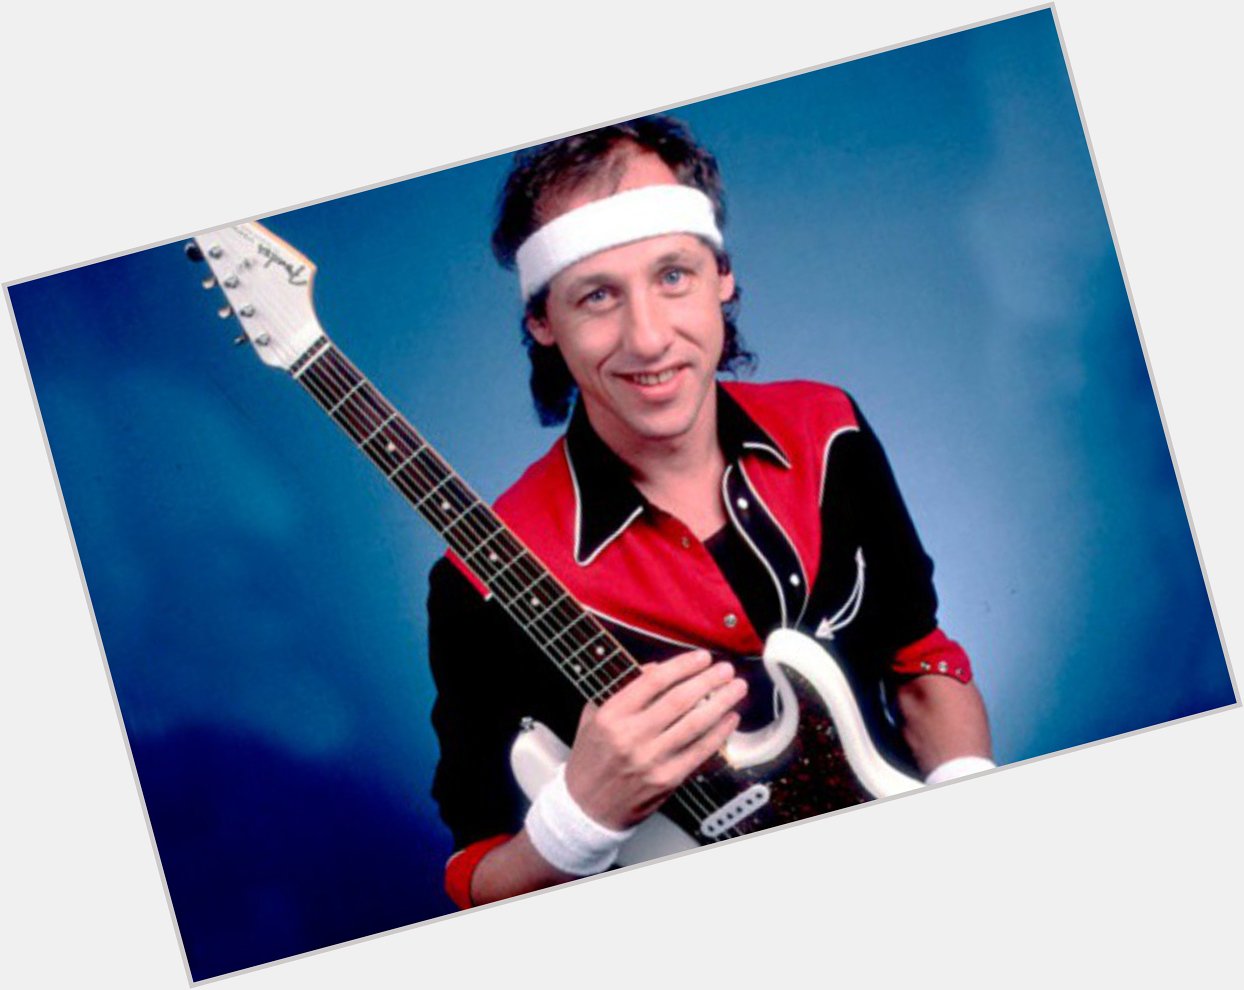 BraveWords666: Happy Birthday to Mark Knopfler (DIRE STRAITS). 
Want to know how many records he\s sold? 
120 mill 